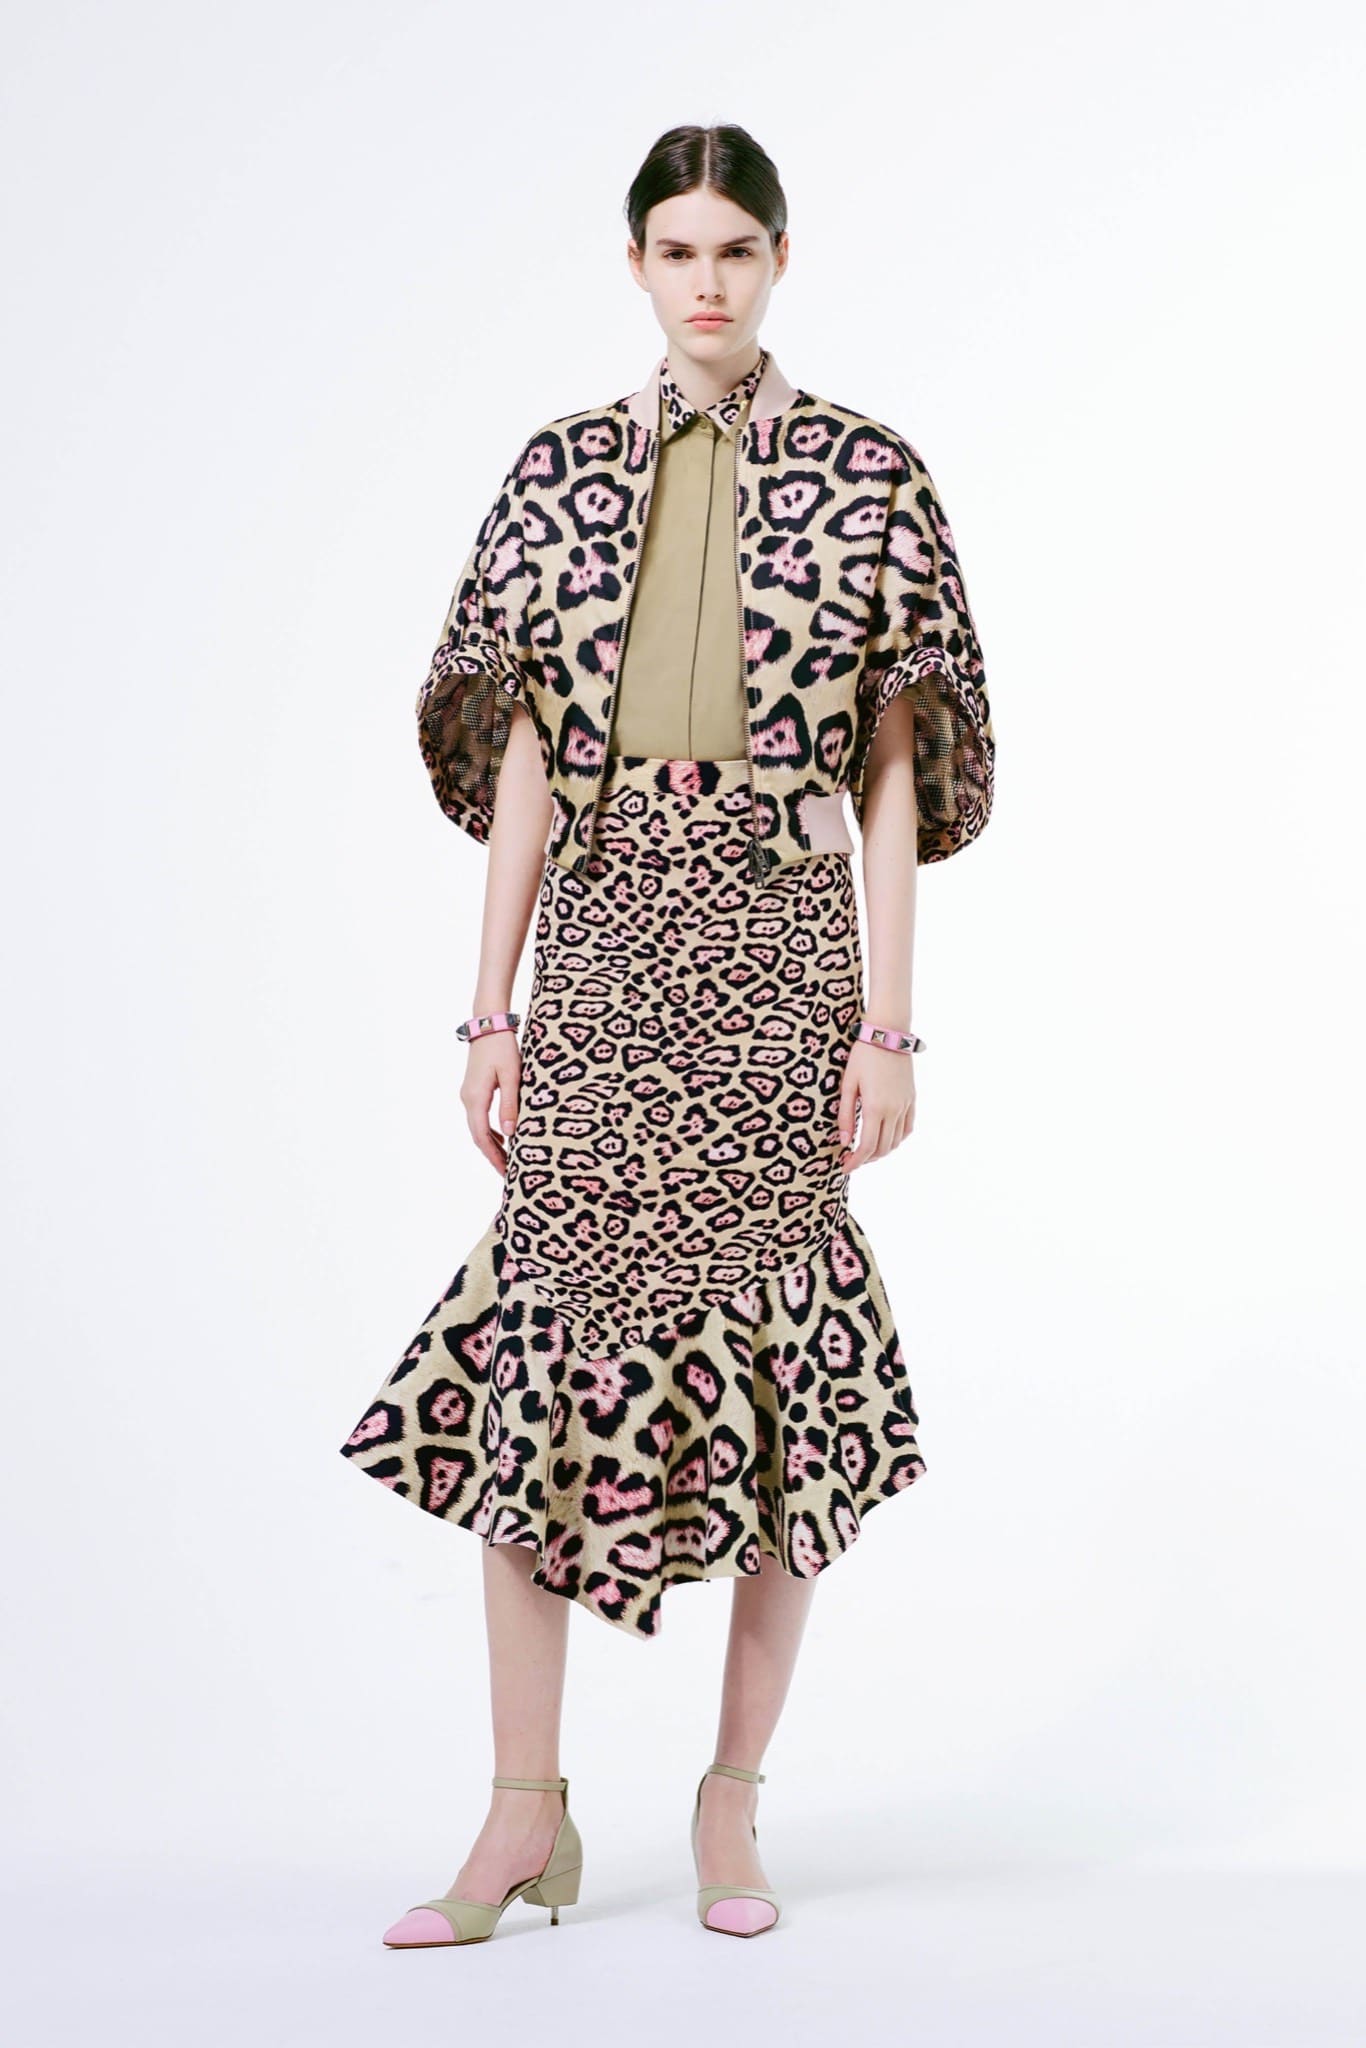 Givenchy Resort 2016 Collection featuring Green Leopard Print – Spotted ...